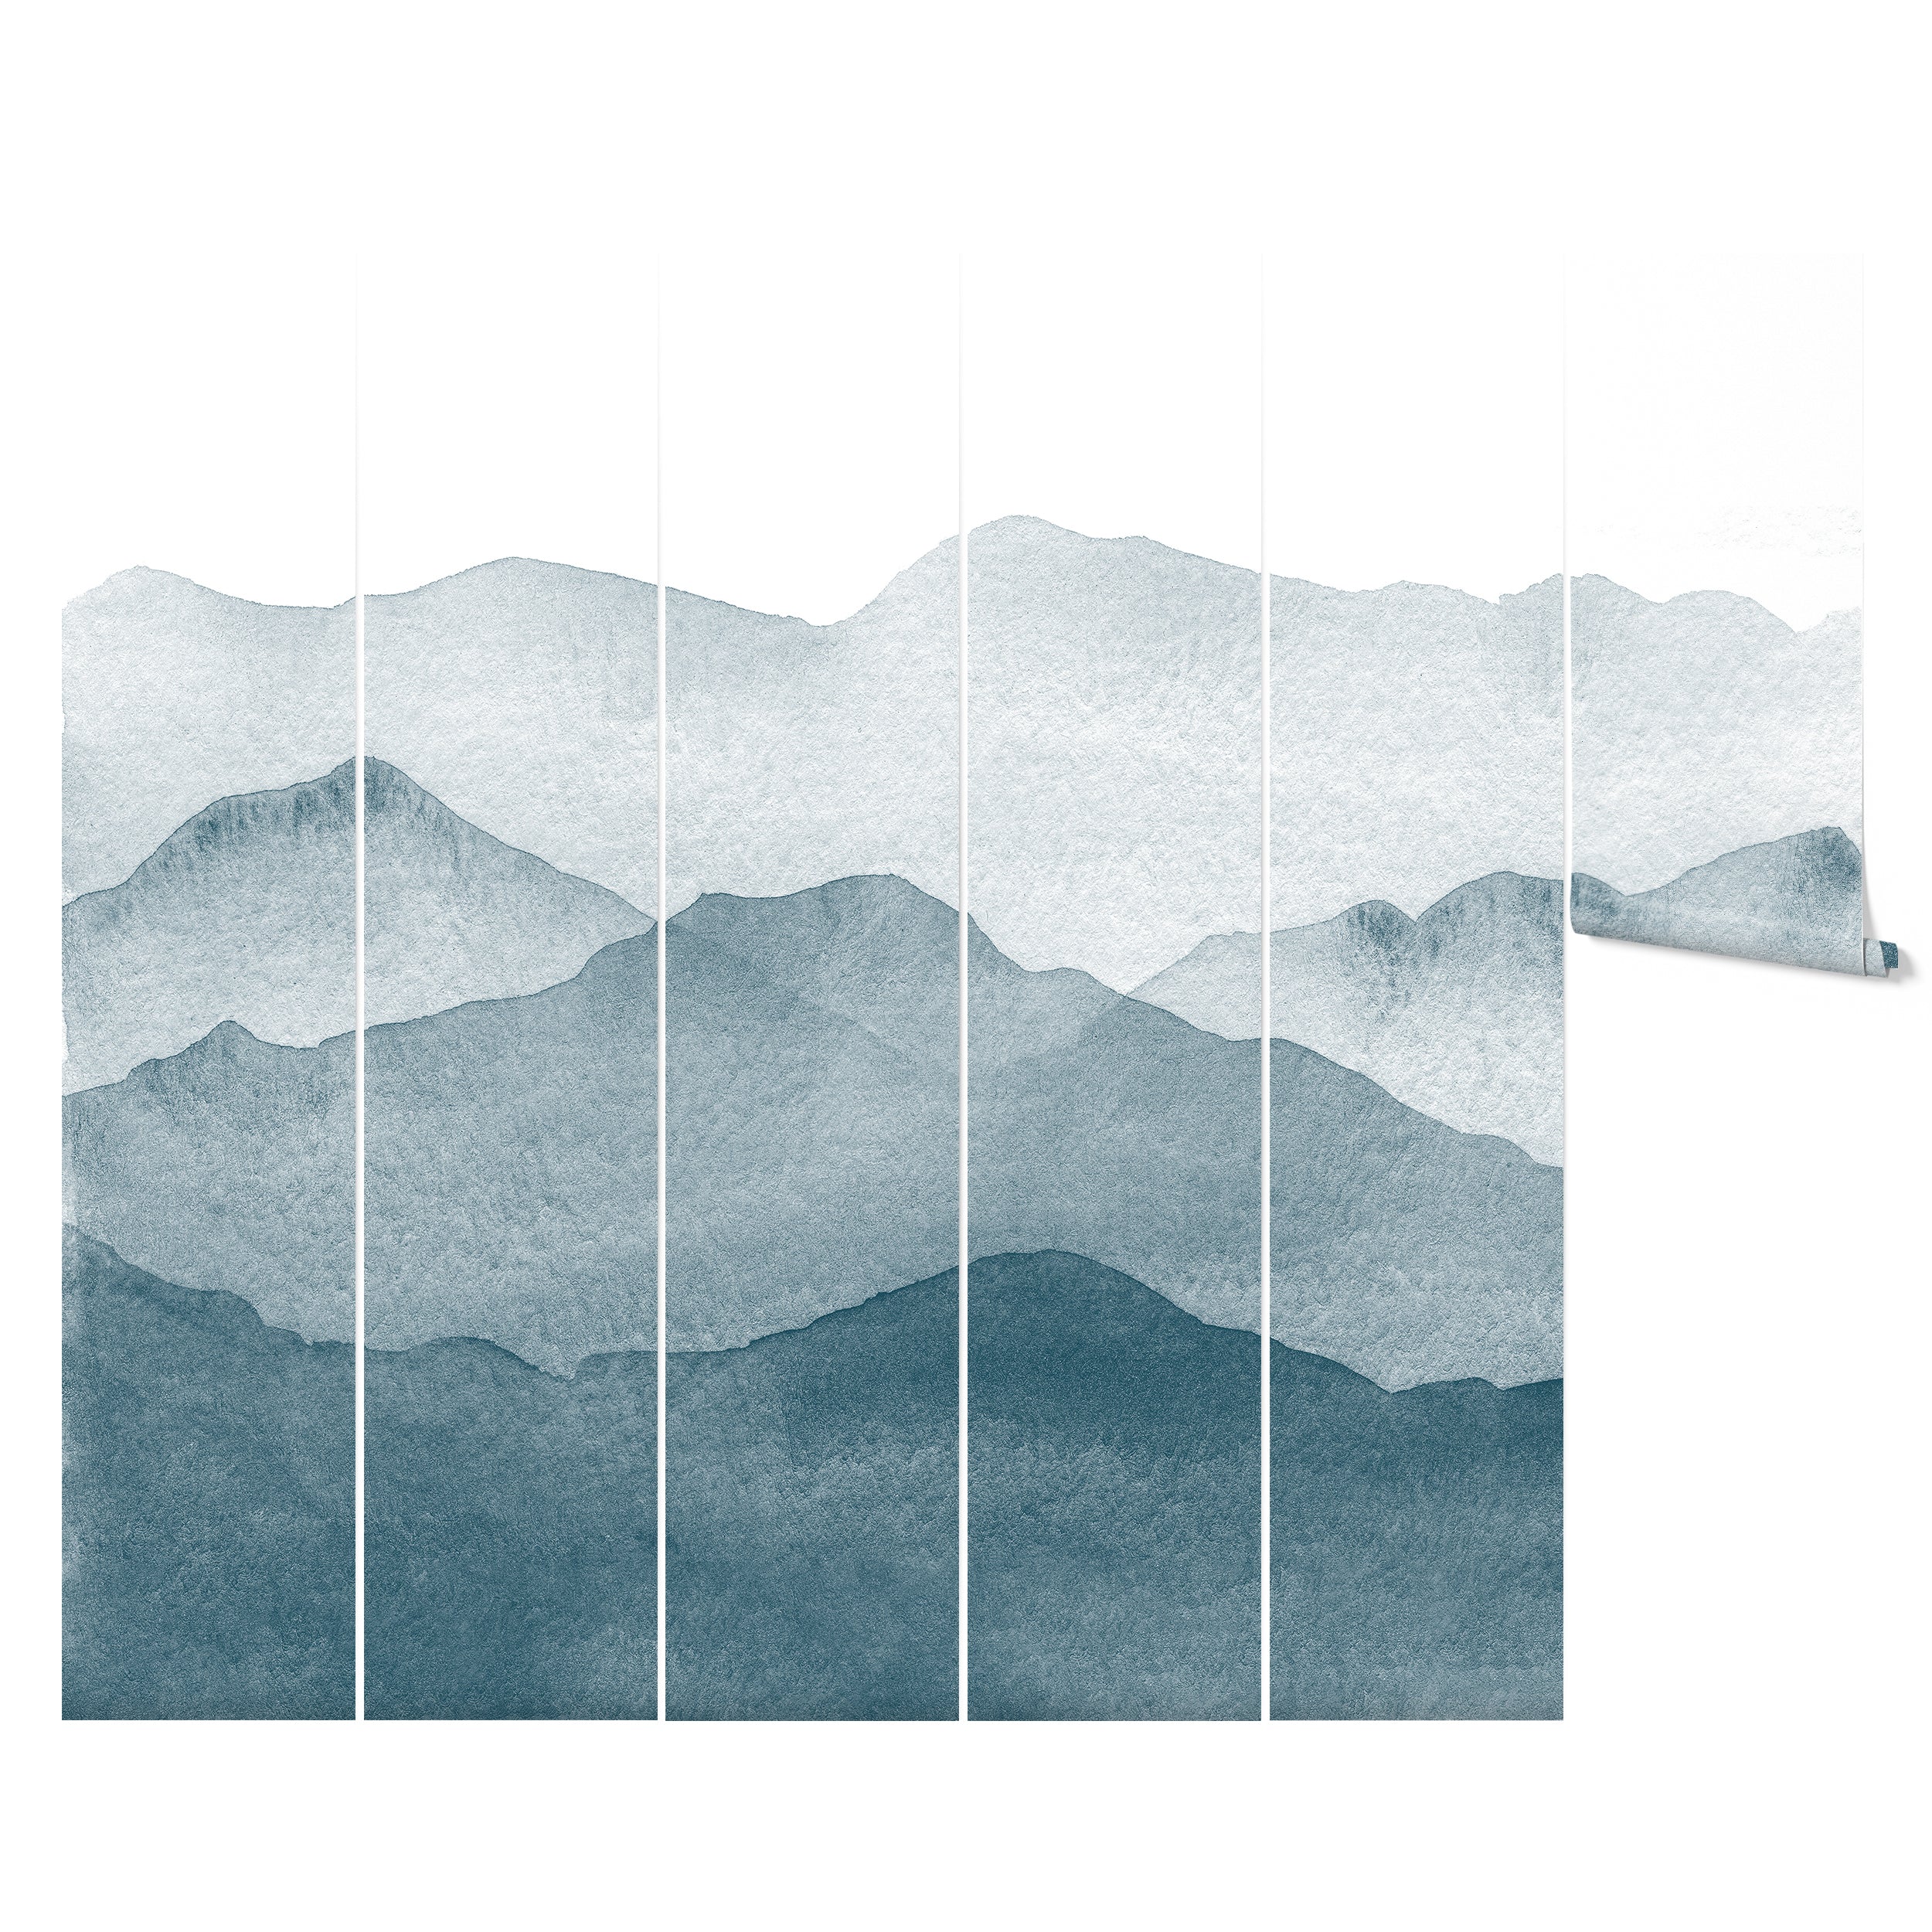 Panels of the Watercolour Mountains Wallpaper Mural, displaying the textured watercolor effect of blue mountain ranges. Each panel features the continuous mountain pattern, ideal for adding a dramatic yet peaceful element to any room's decor.